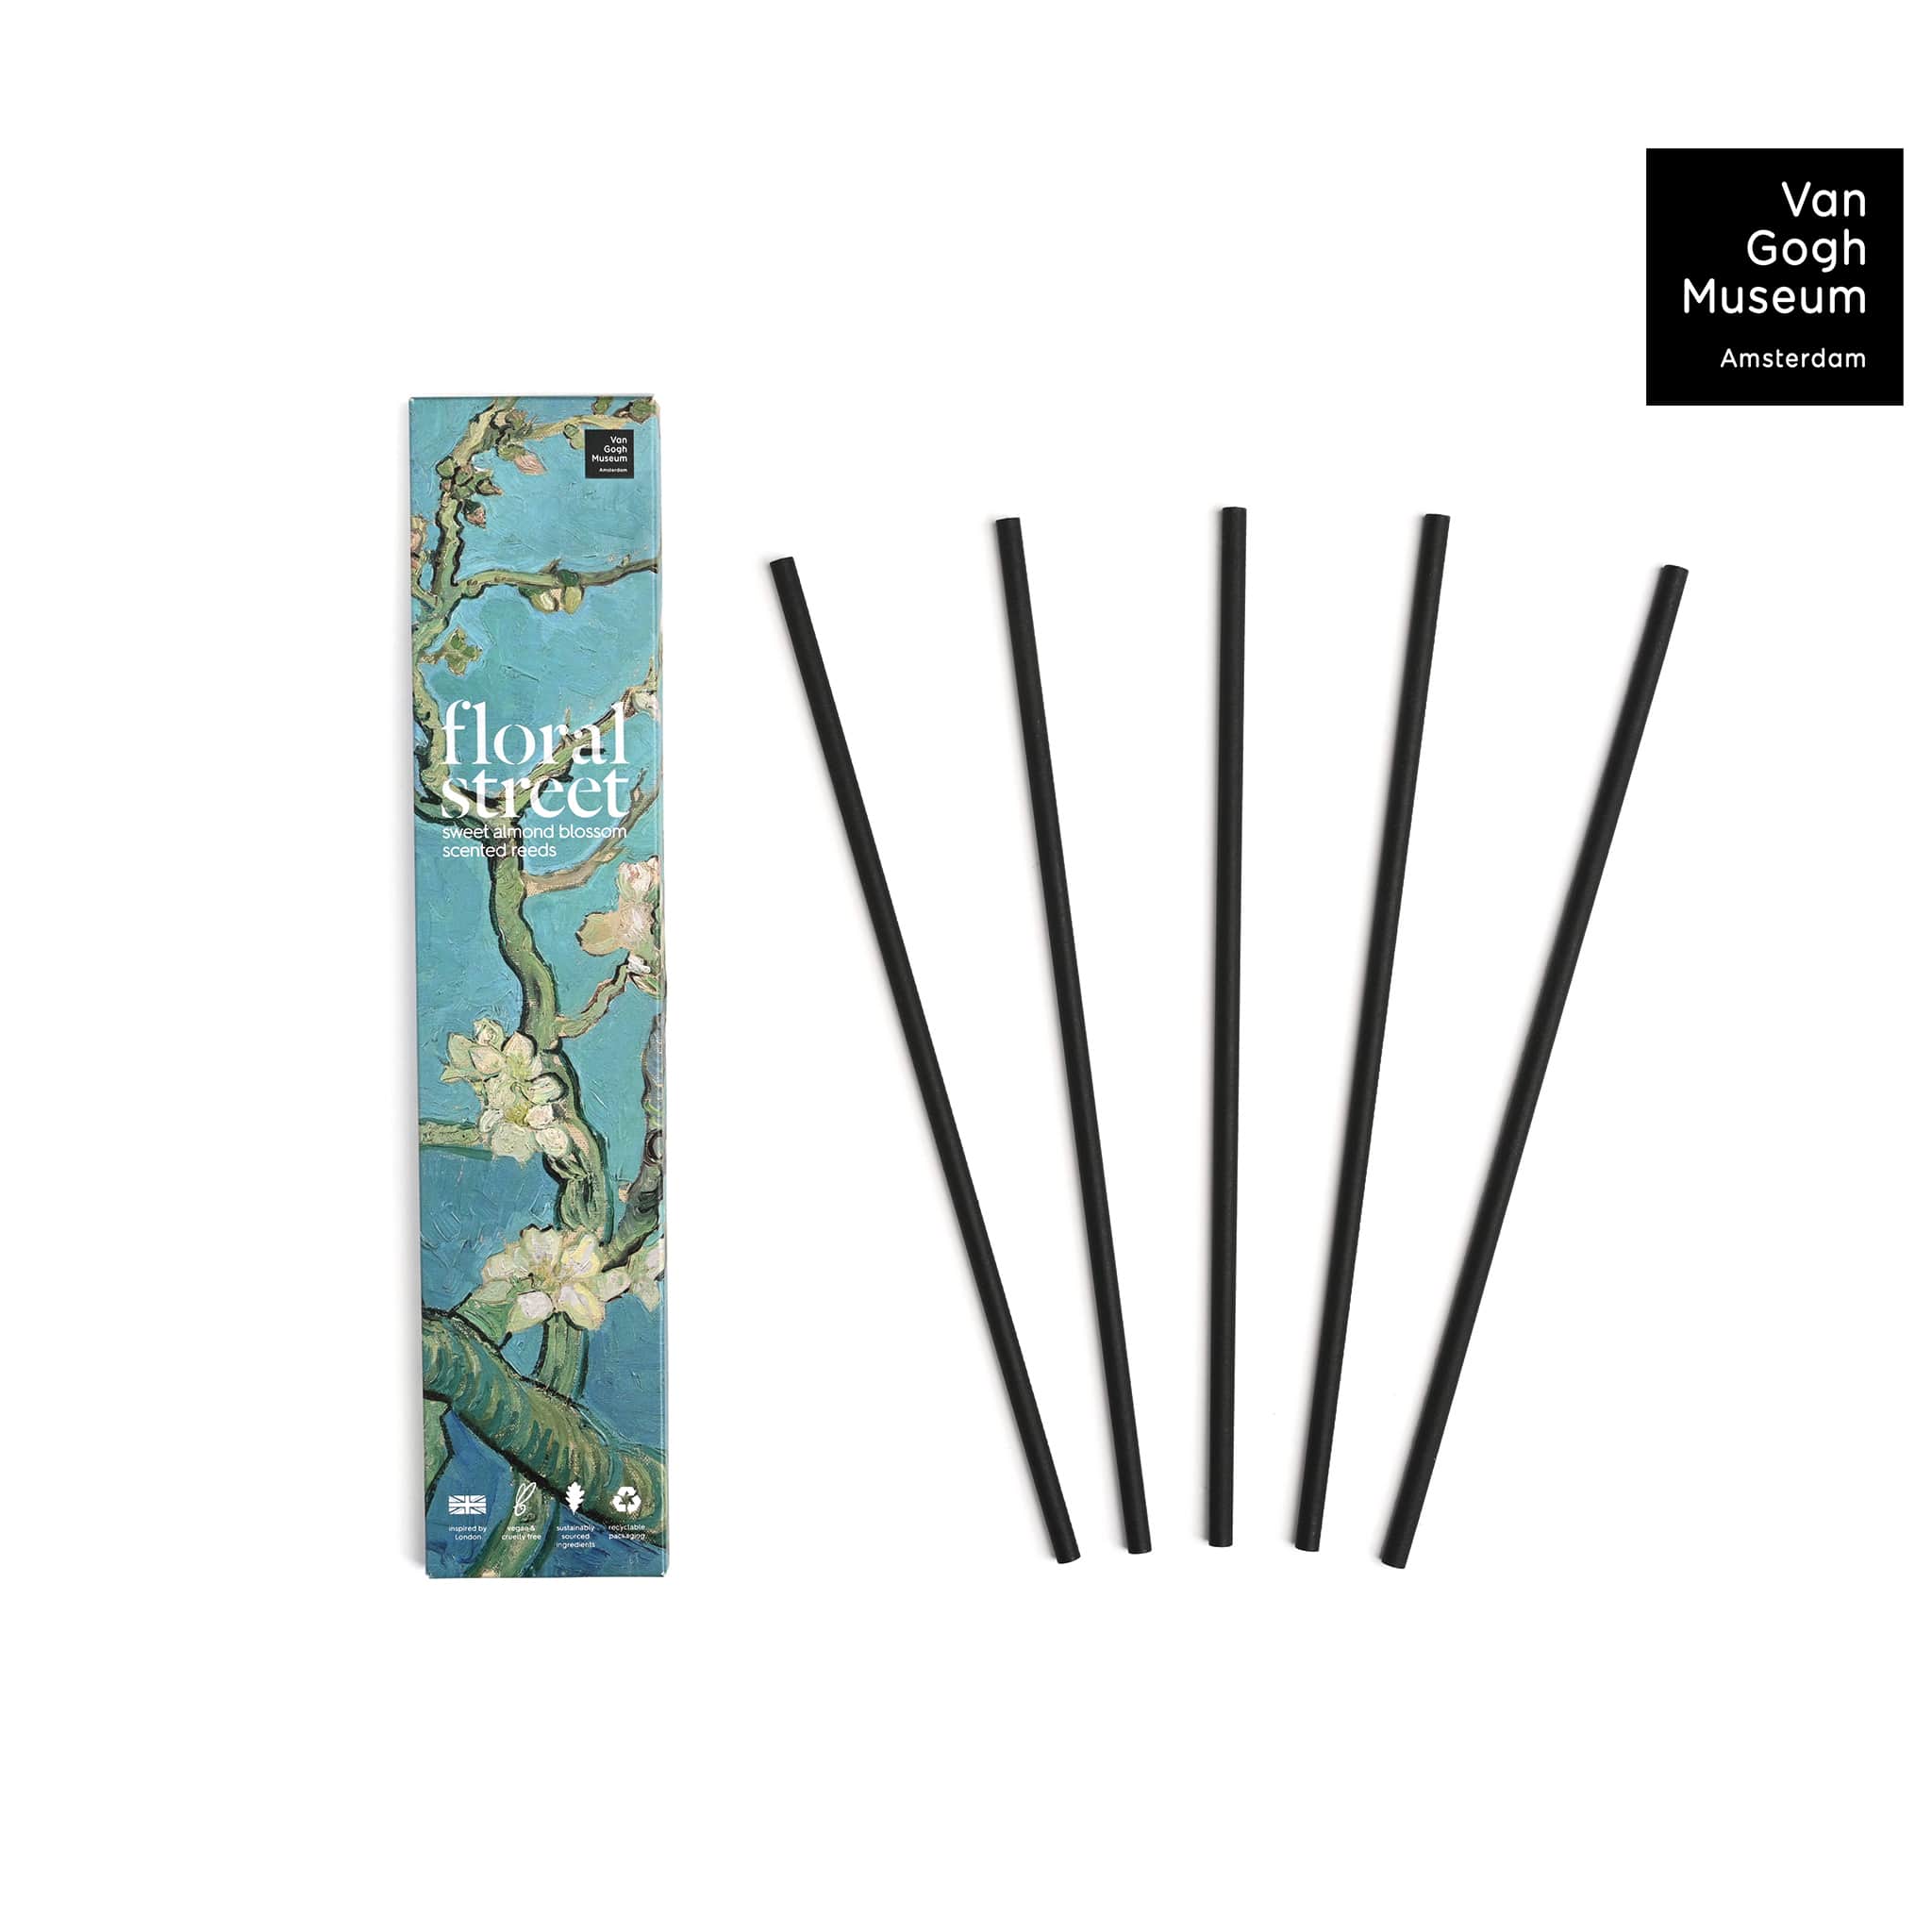 sweet almond blossom scented reeds